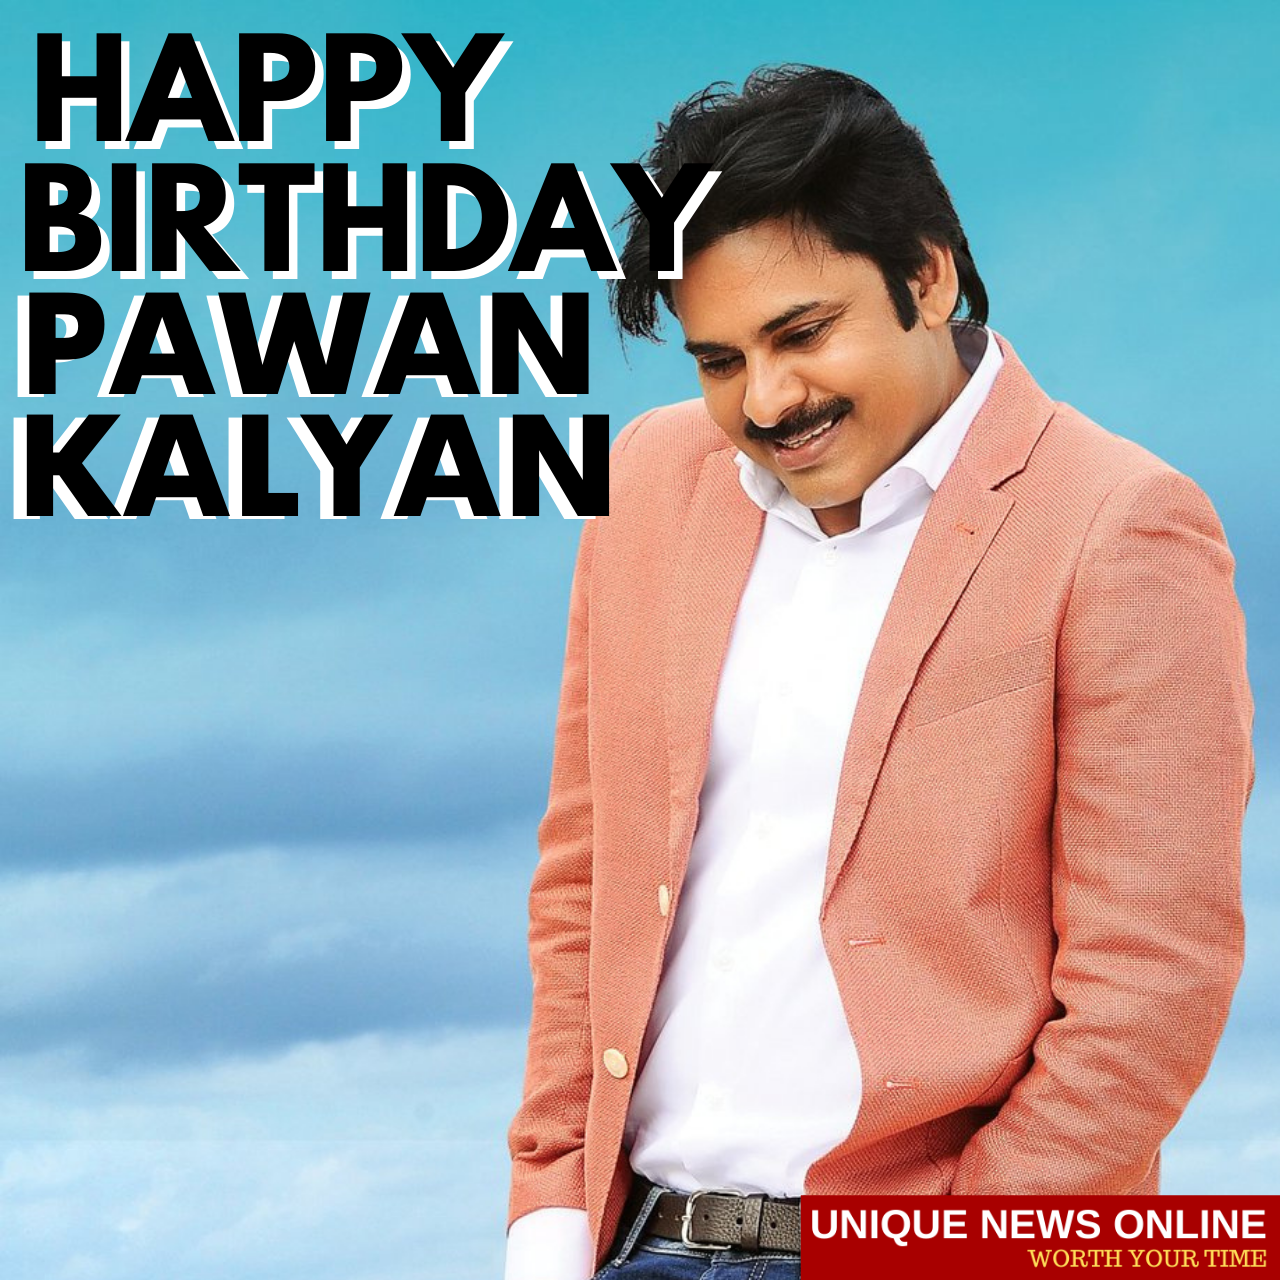 Happy Birthday Pawan Kalyan Wishes, Images, Messages, Quotes, and Poster to greet famous Telugu actor